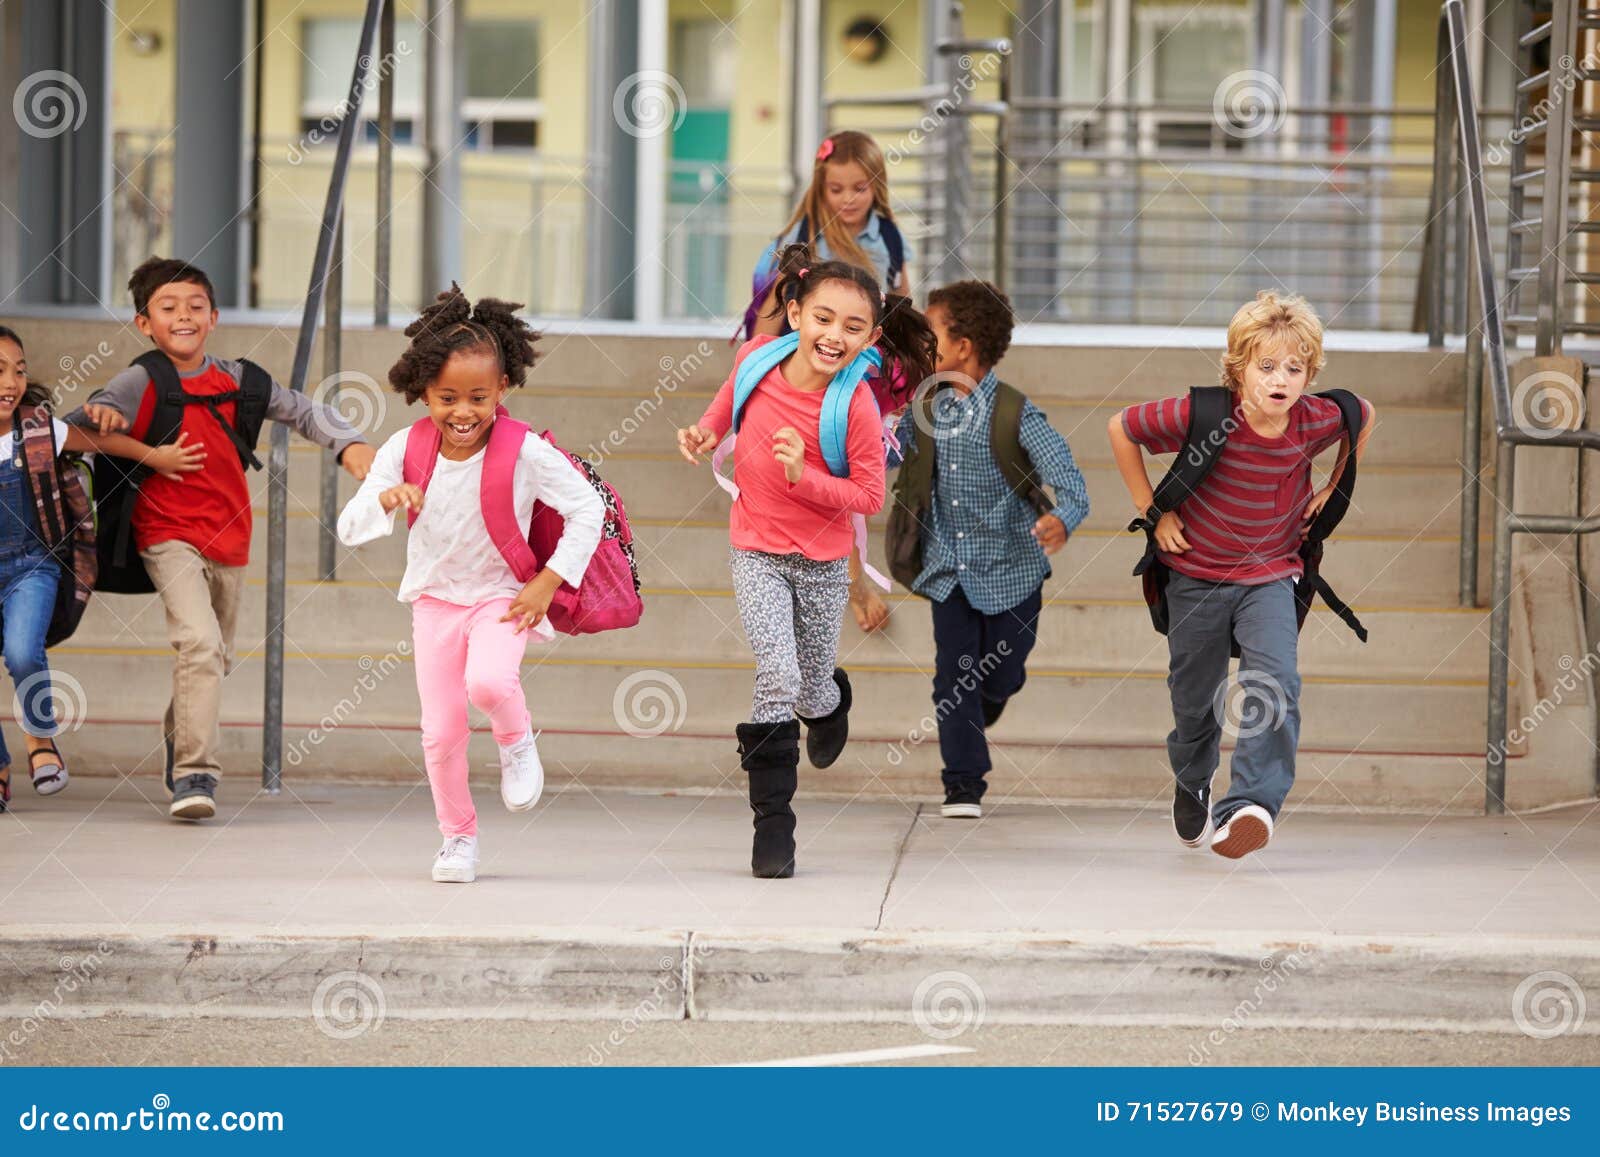 a group of ary school kids rushing out of school